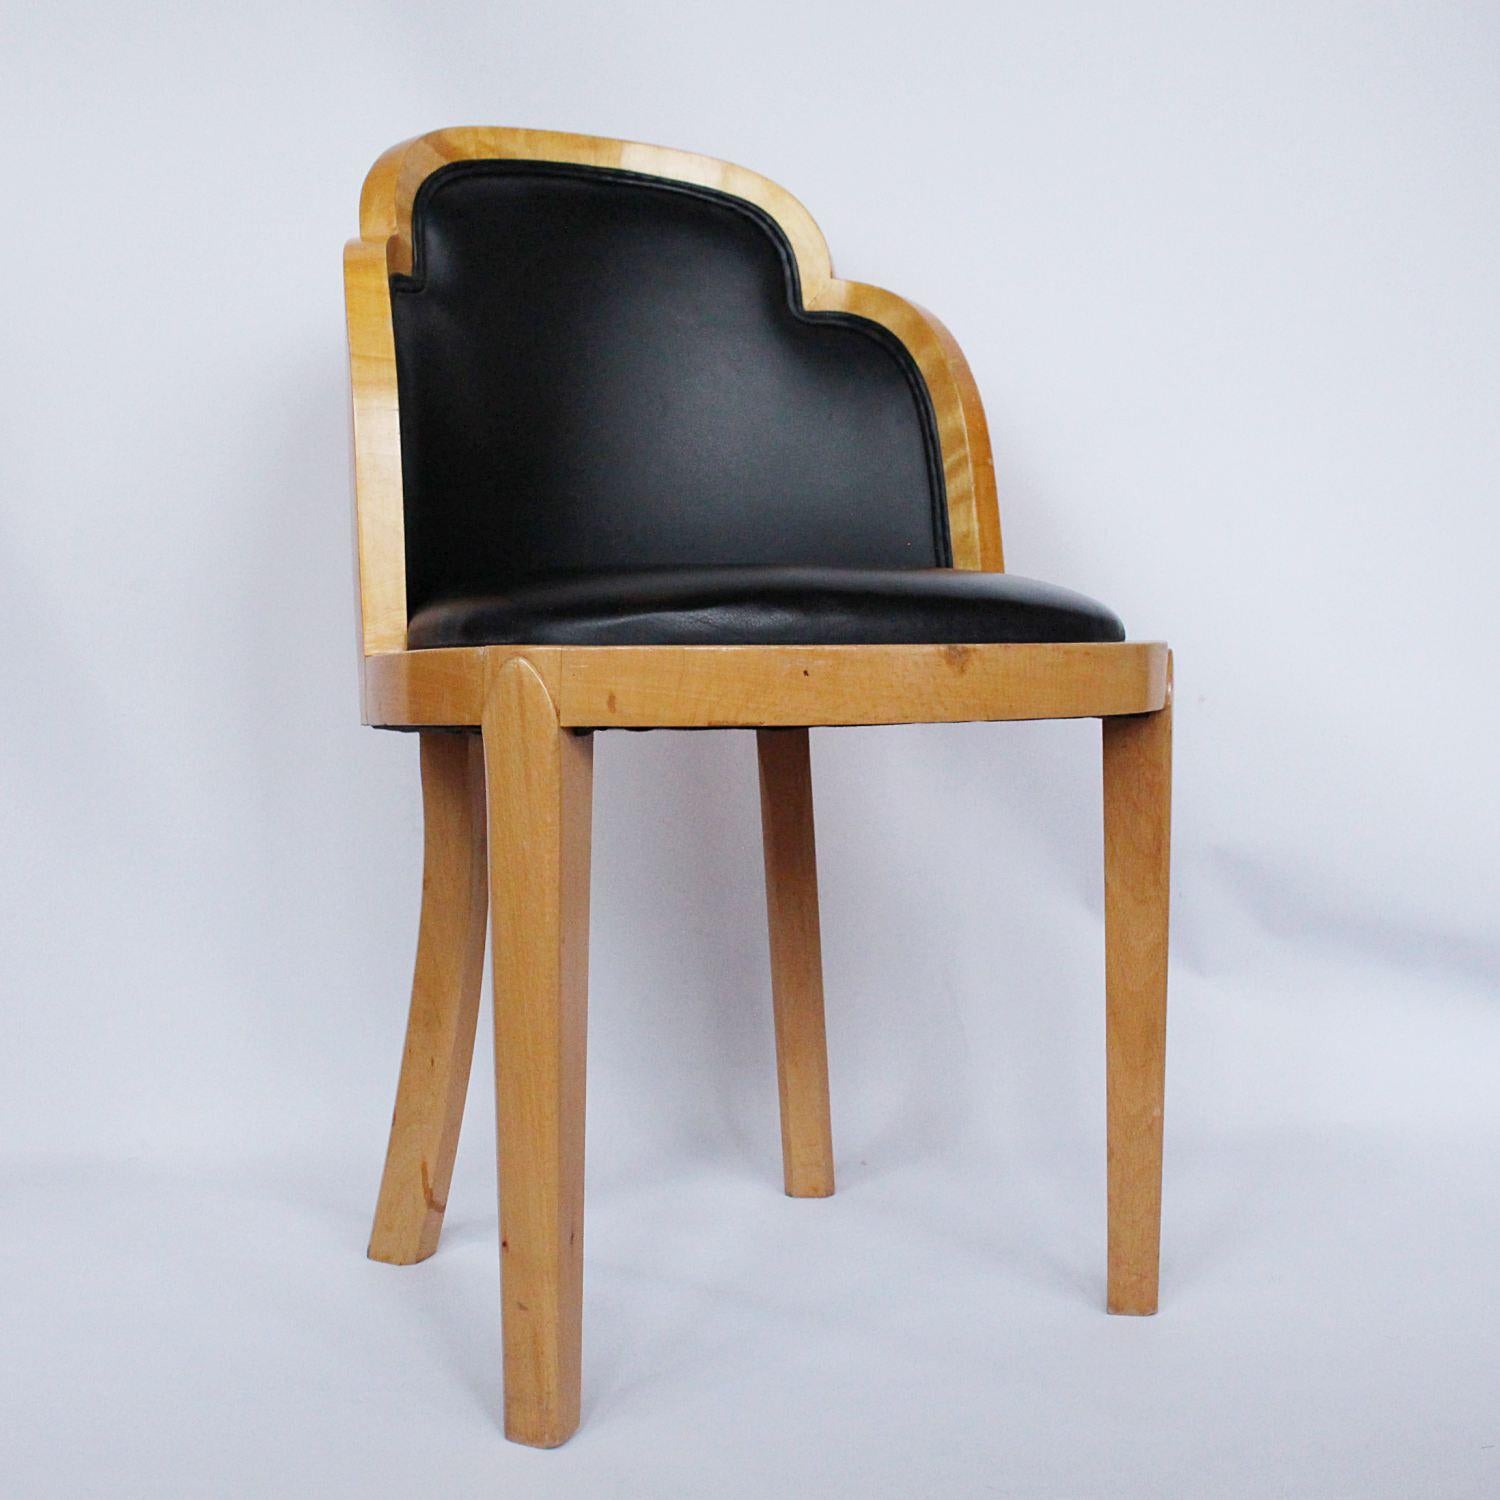 English Pair of Art Deco Side Chairs. Satin Wood & Black Leather Cloud Back Design 1930